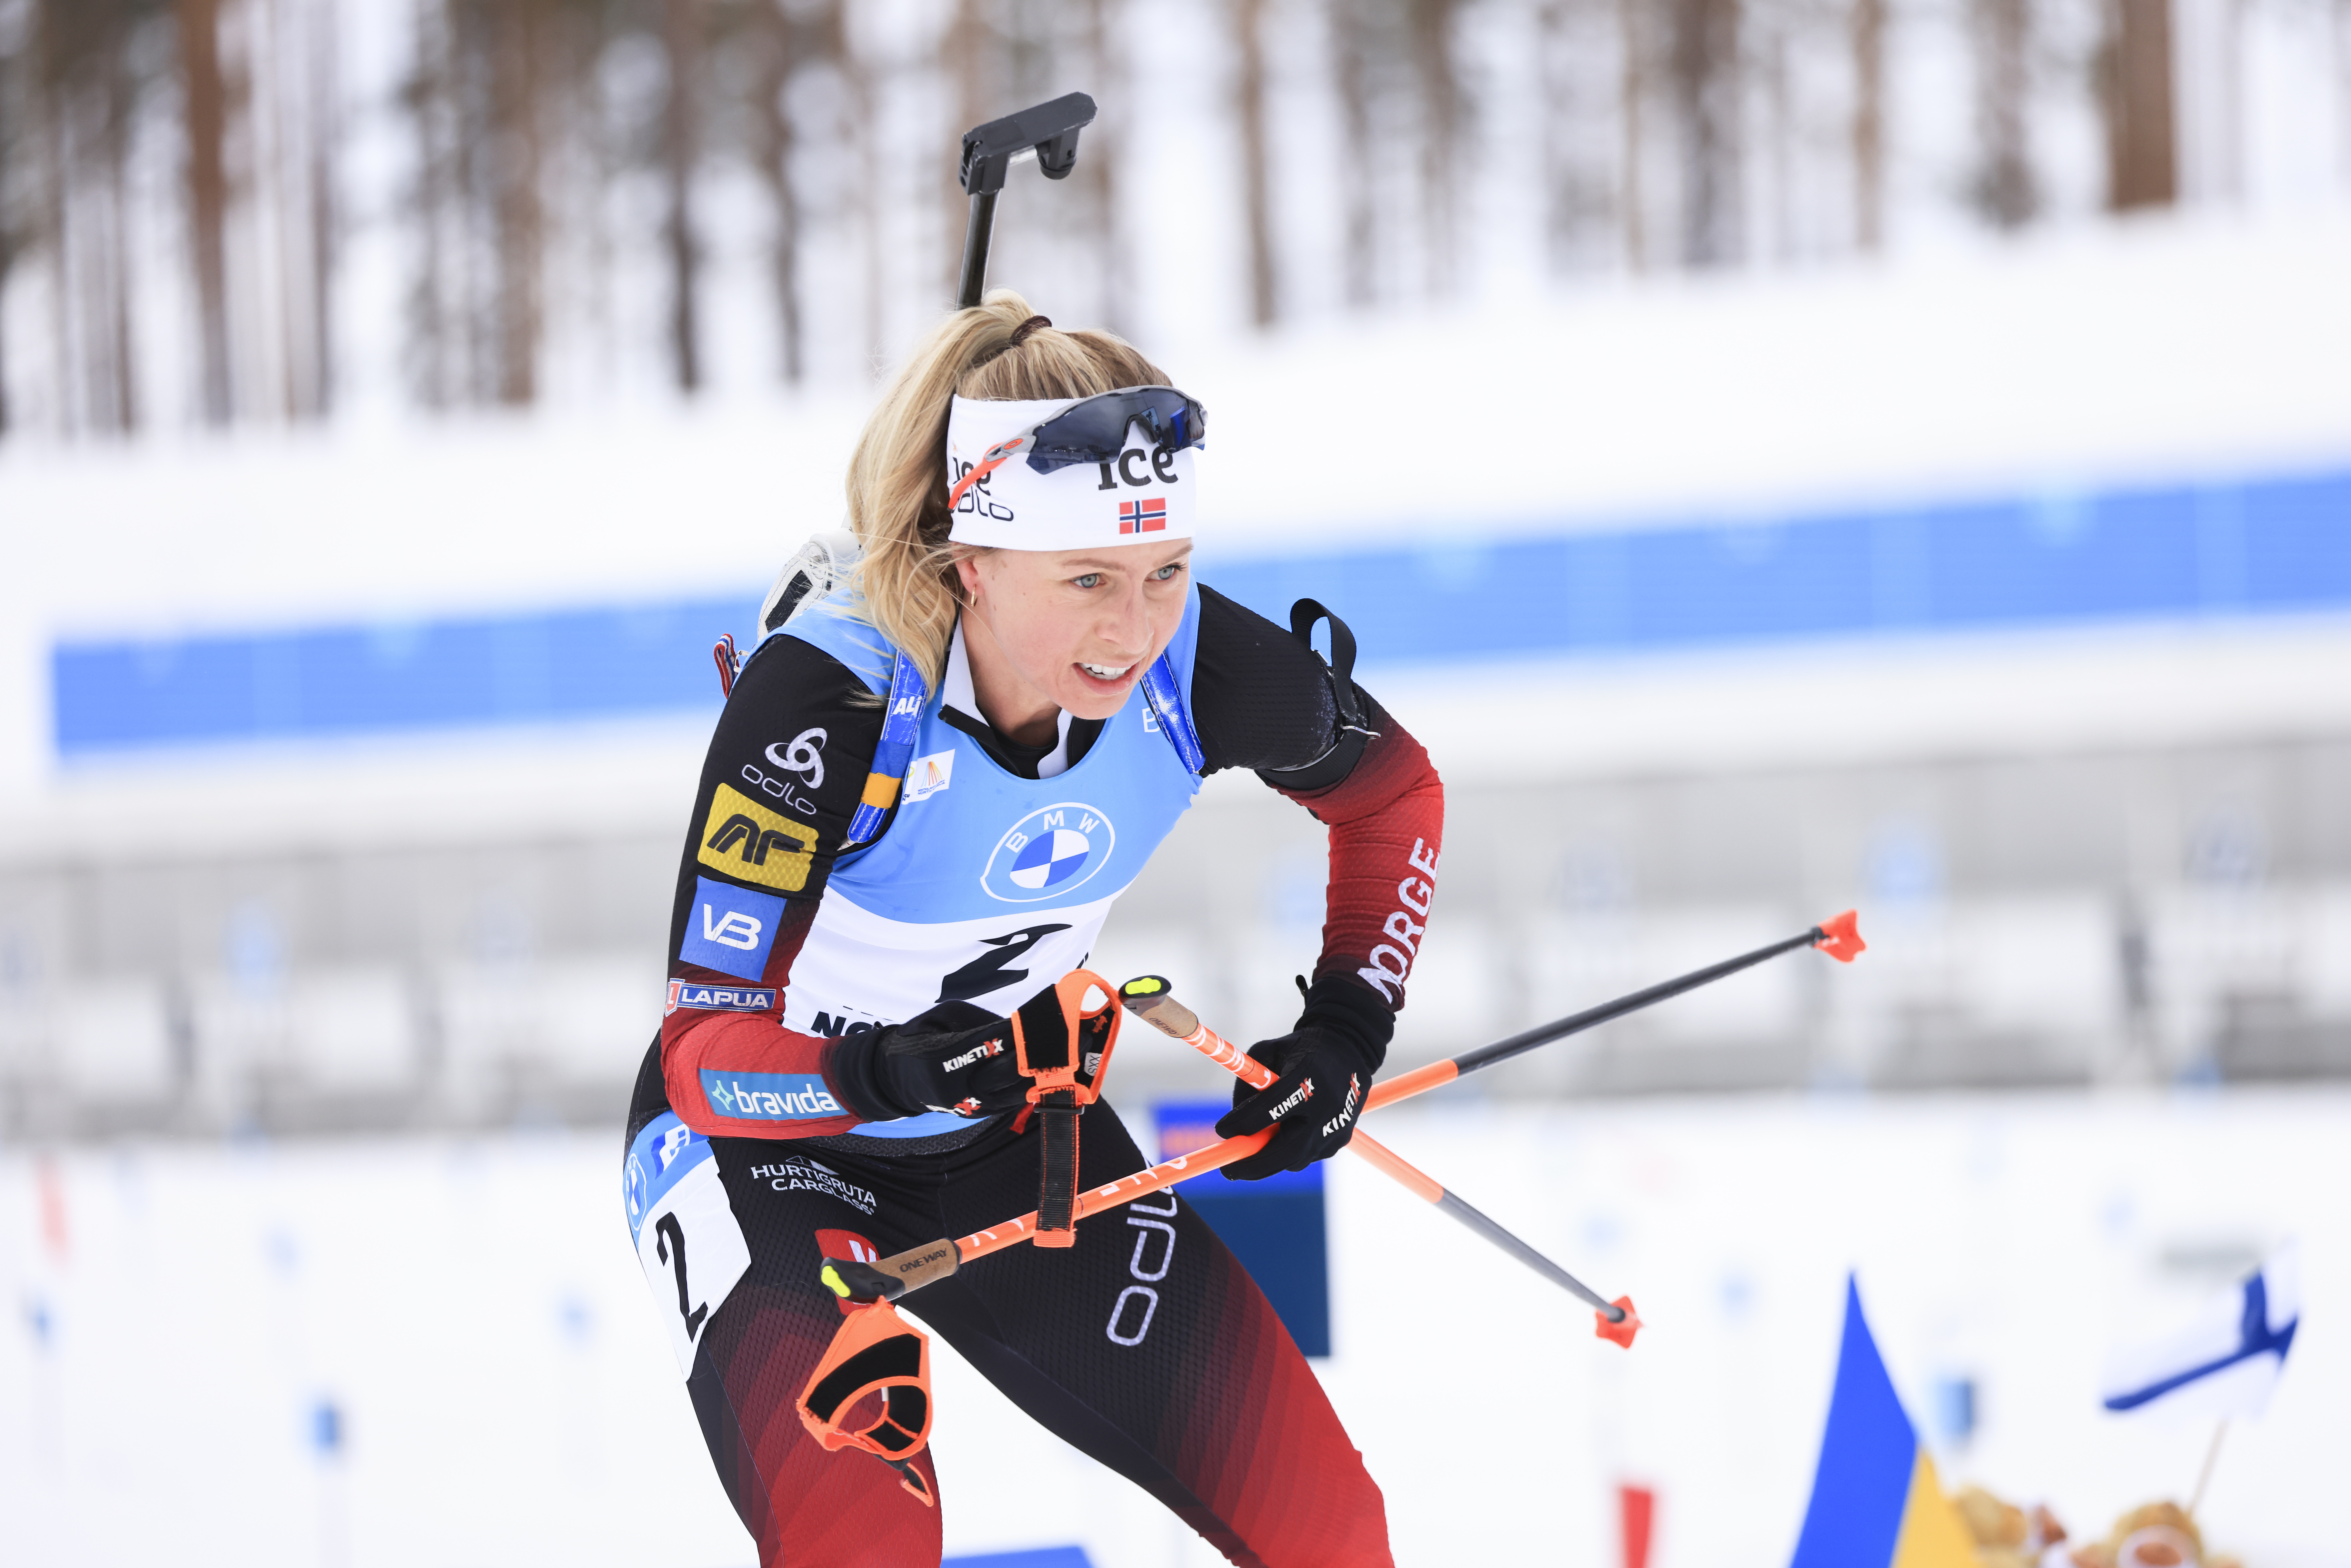 Eckhoff to take break from competitions